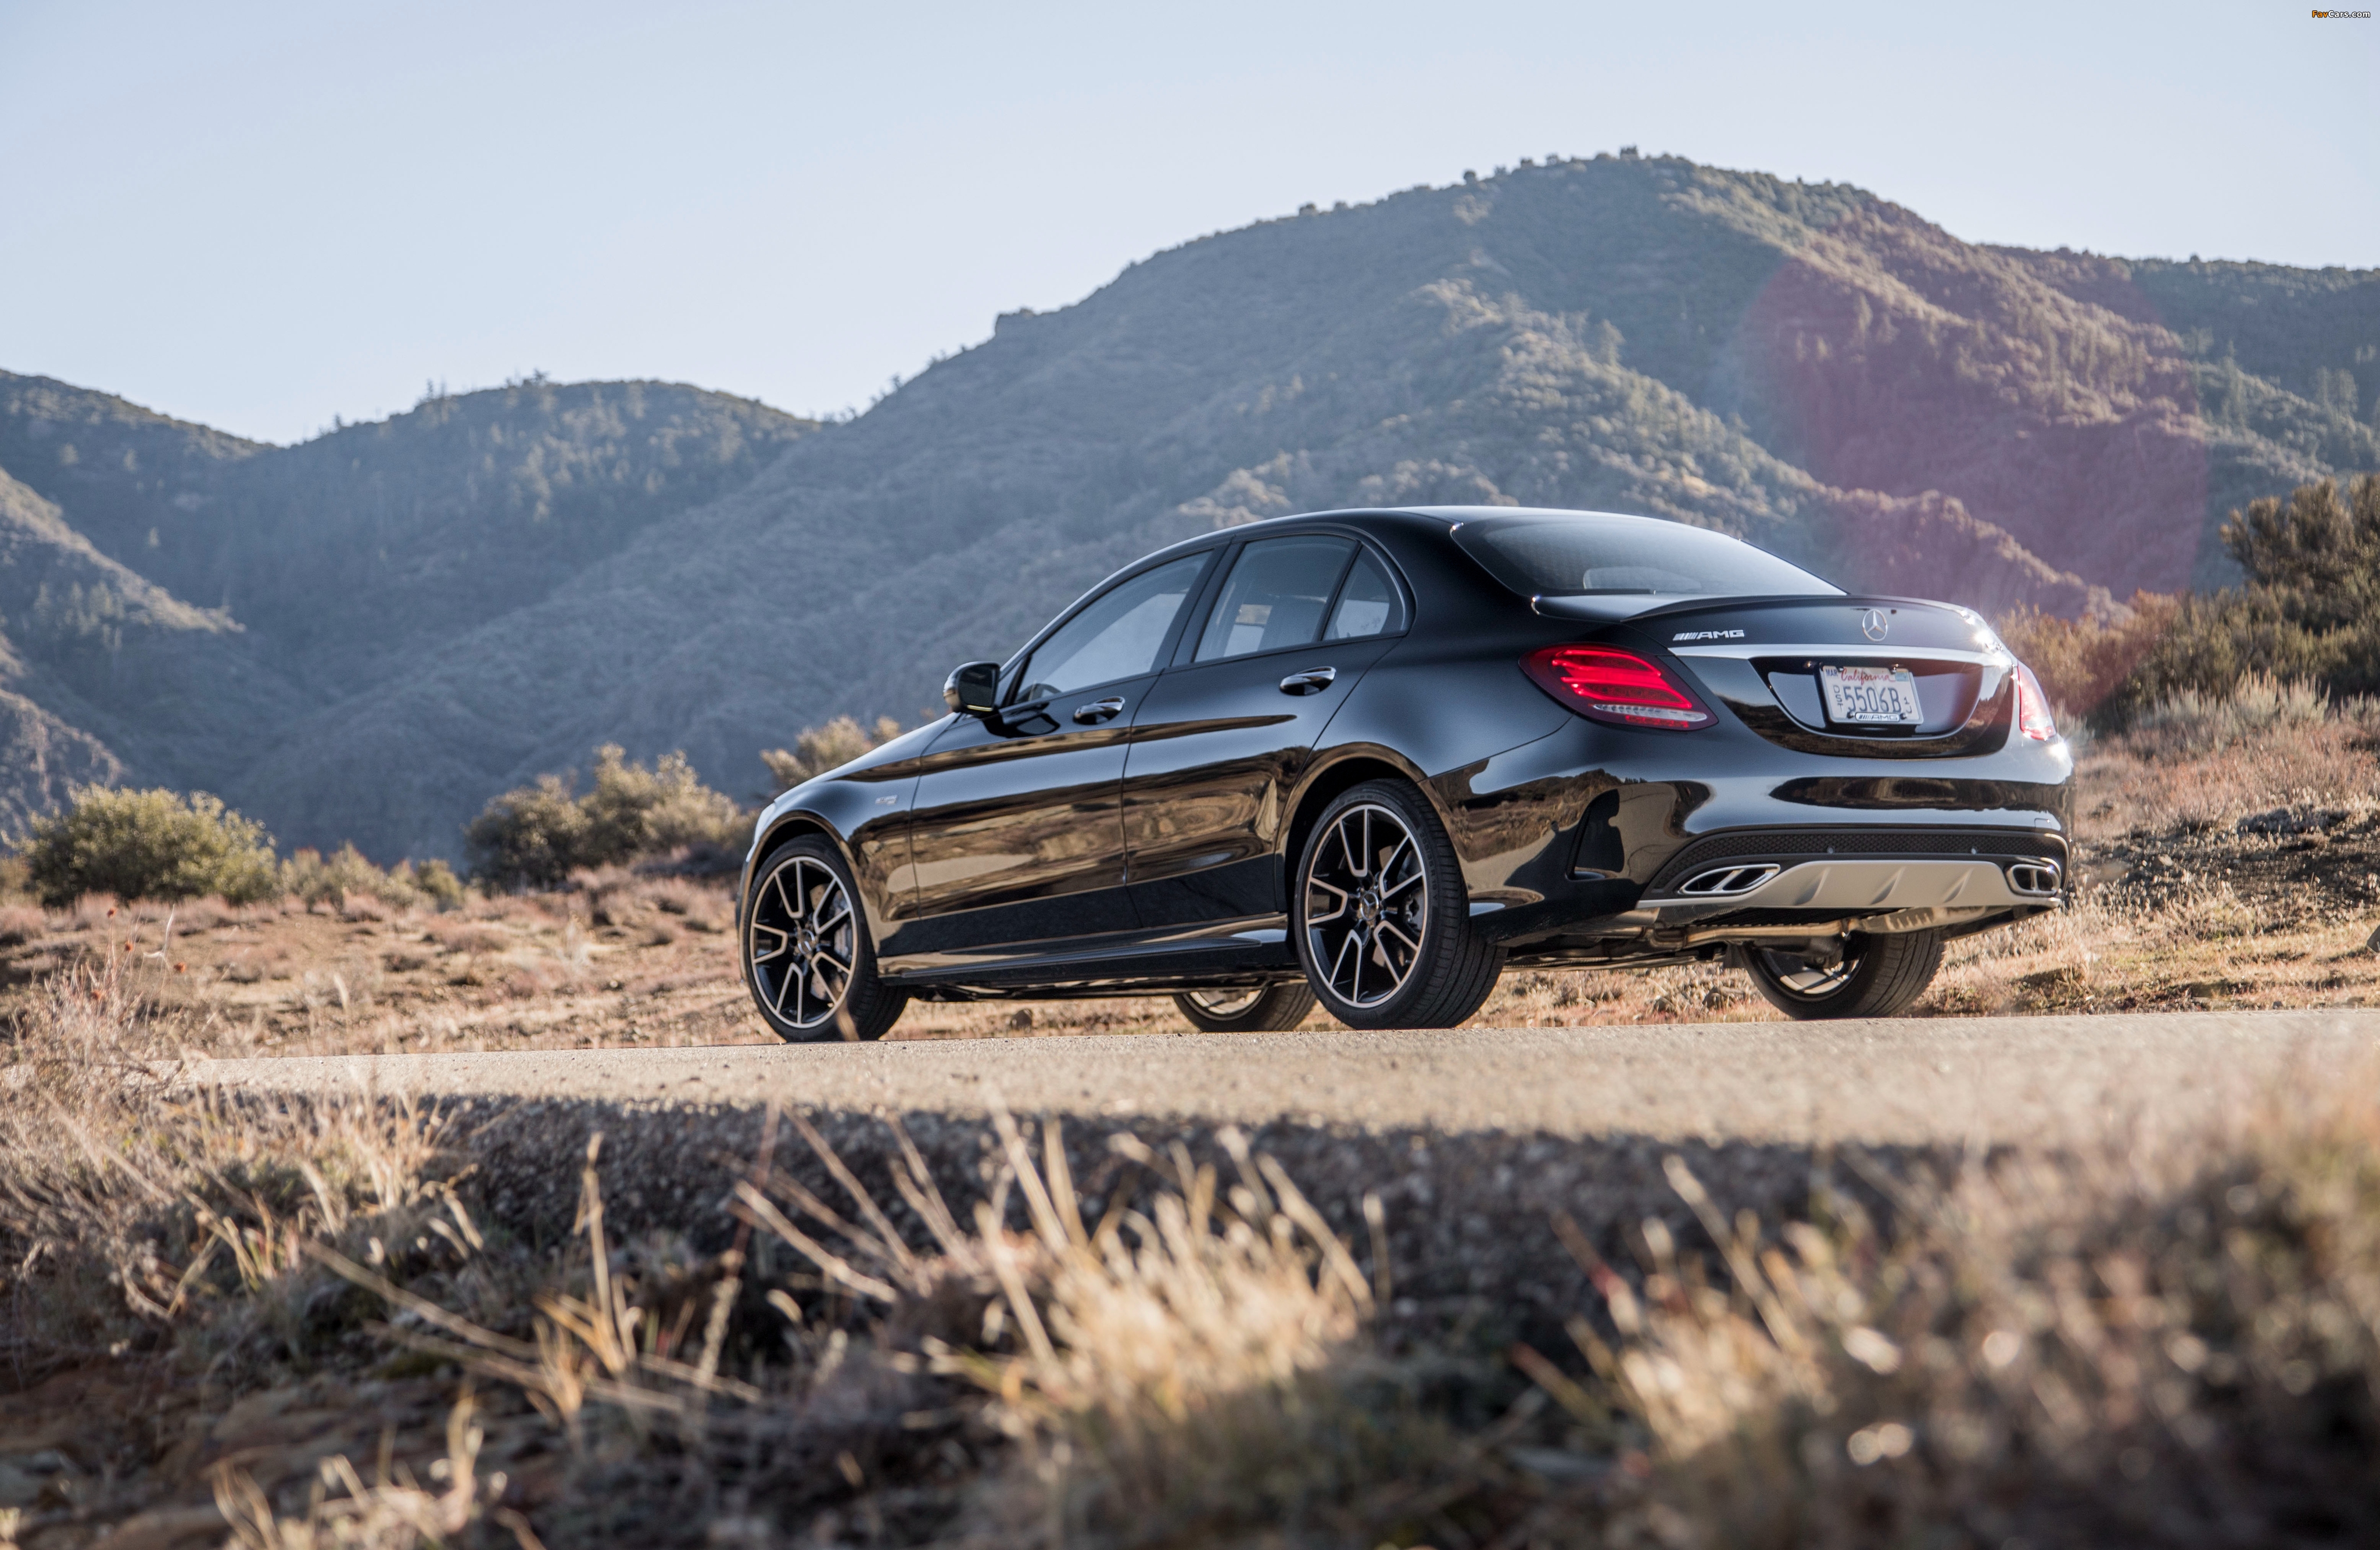 Mercedes-AMG C 43 4MATIC North America (W205) 2016 pictures (4096 x 2667)